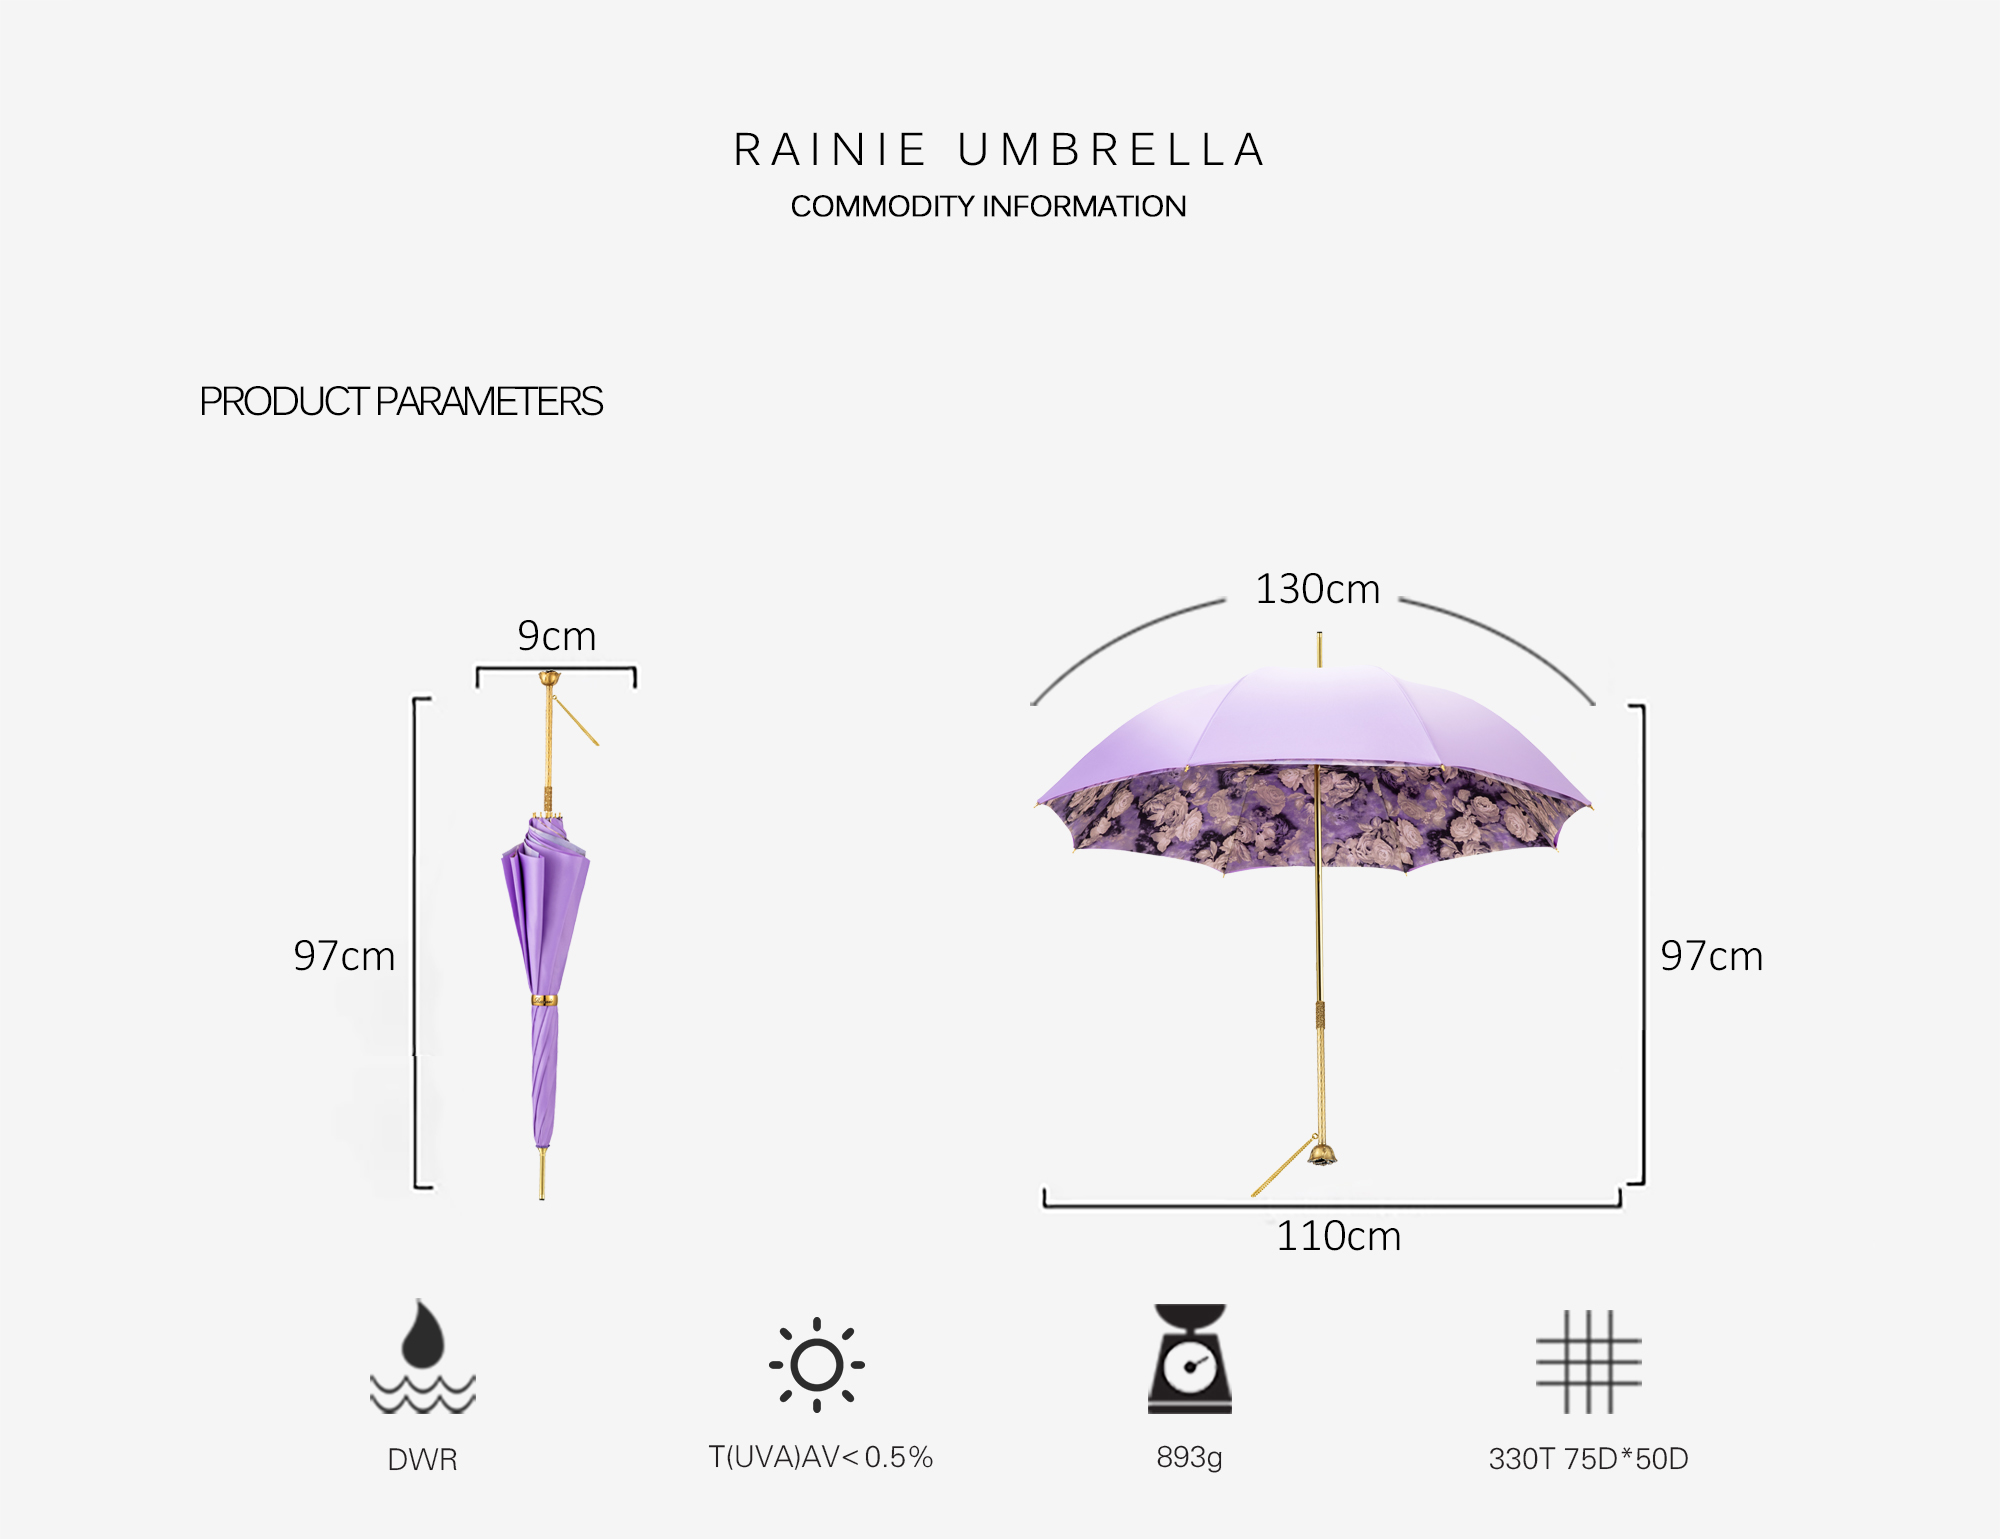 Double umbrella with rose straight handle